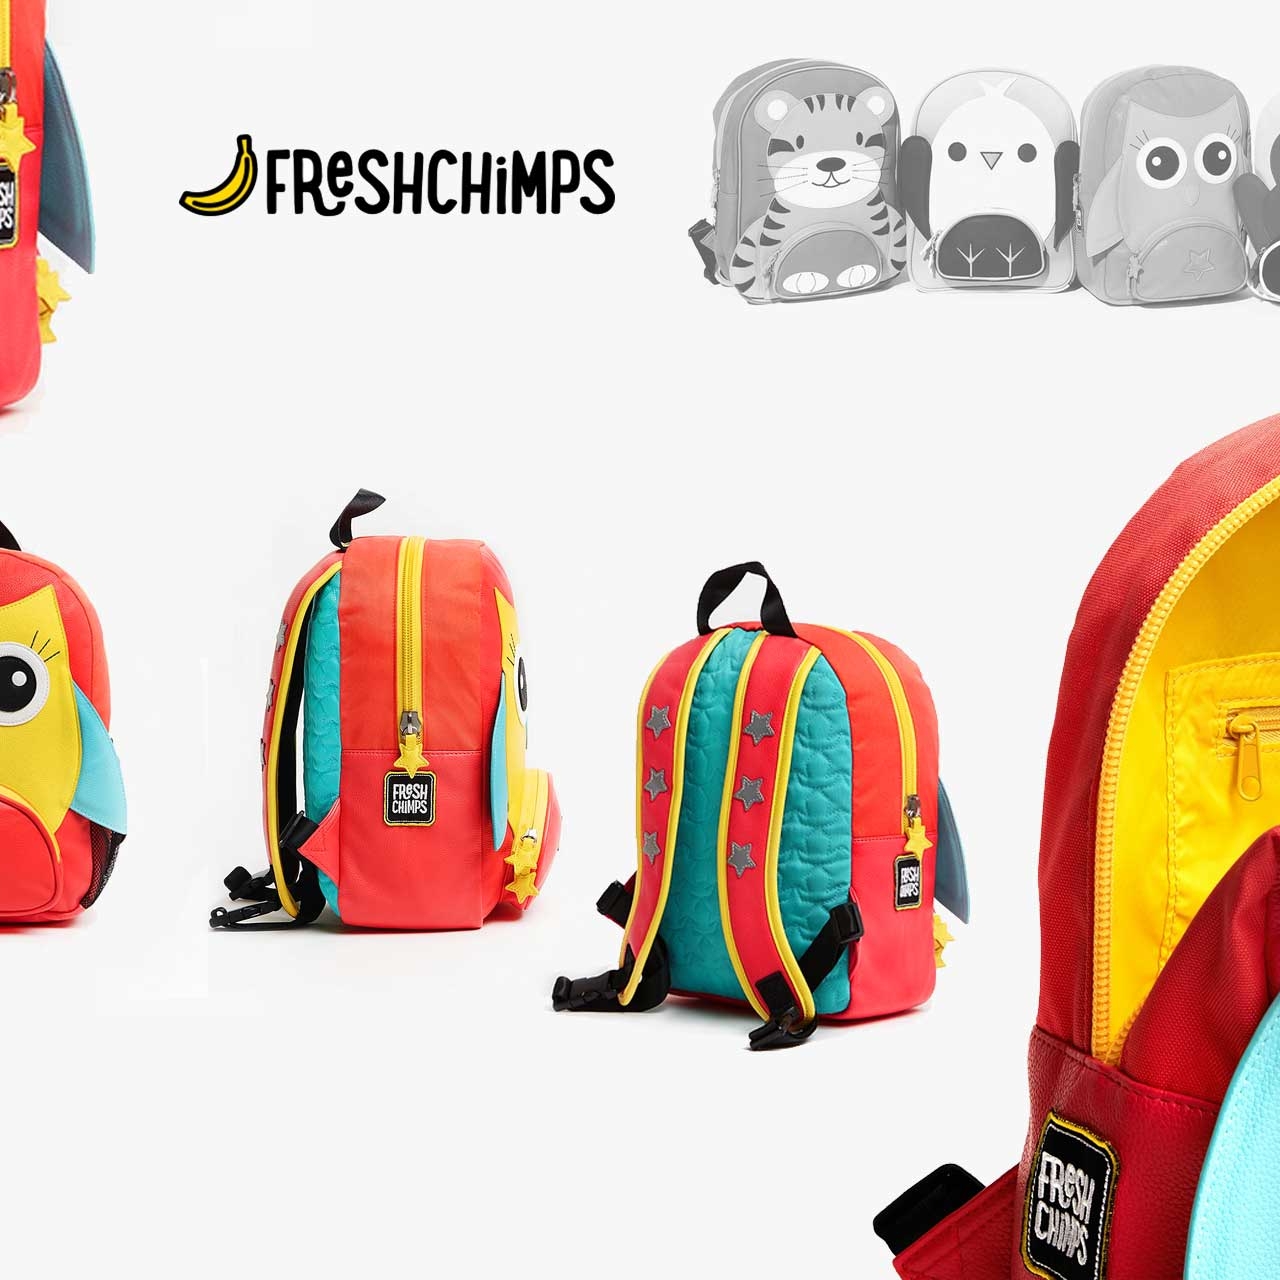 Graphic design agency TVHDesign realized the design of Children&#39;s backpacks for Freshchimps for ease of use and safety without sacrificing style and playfulness